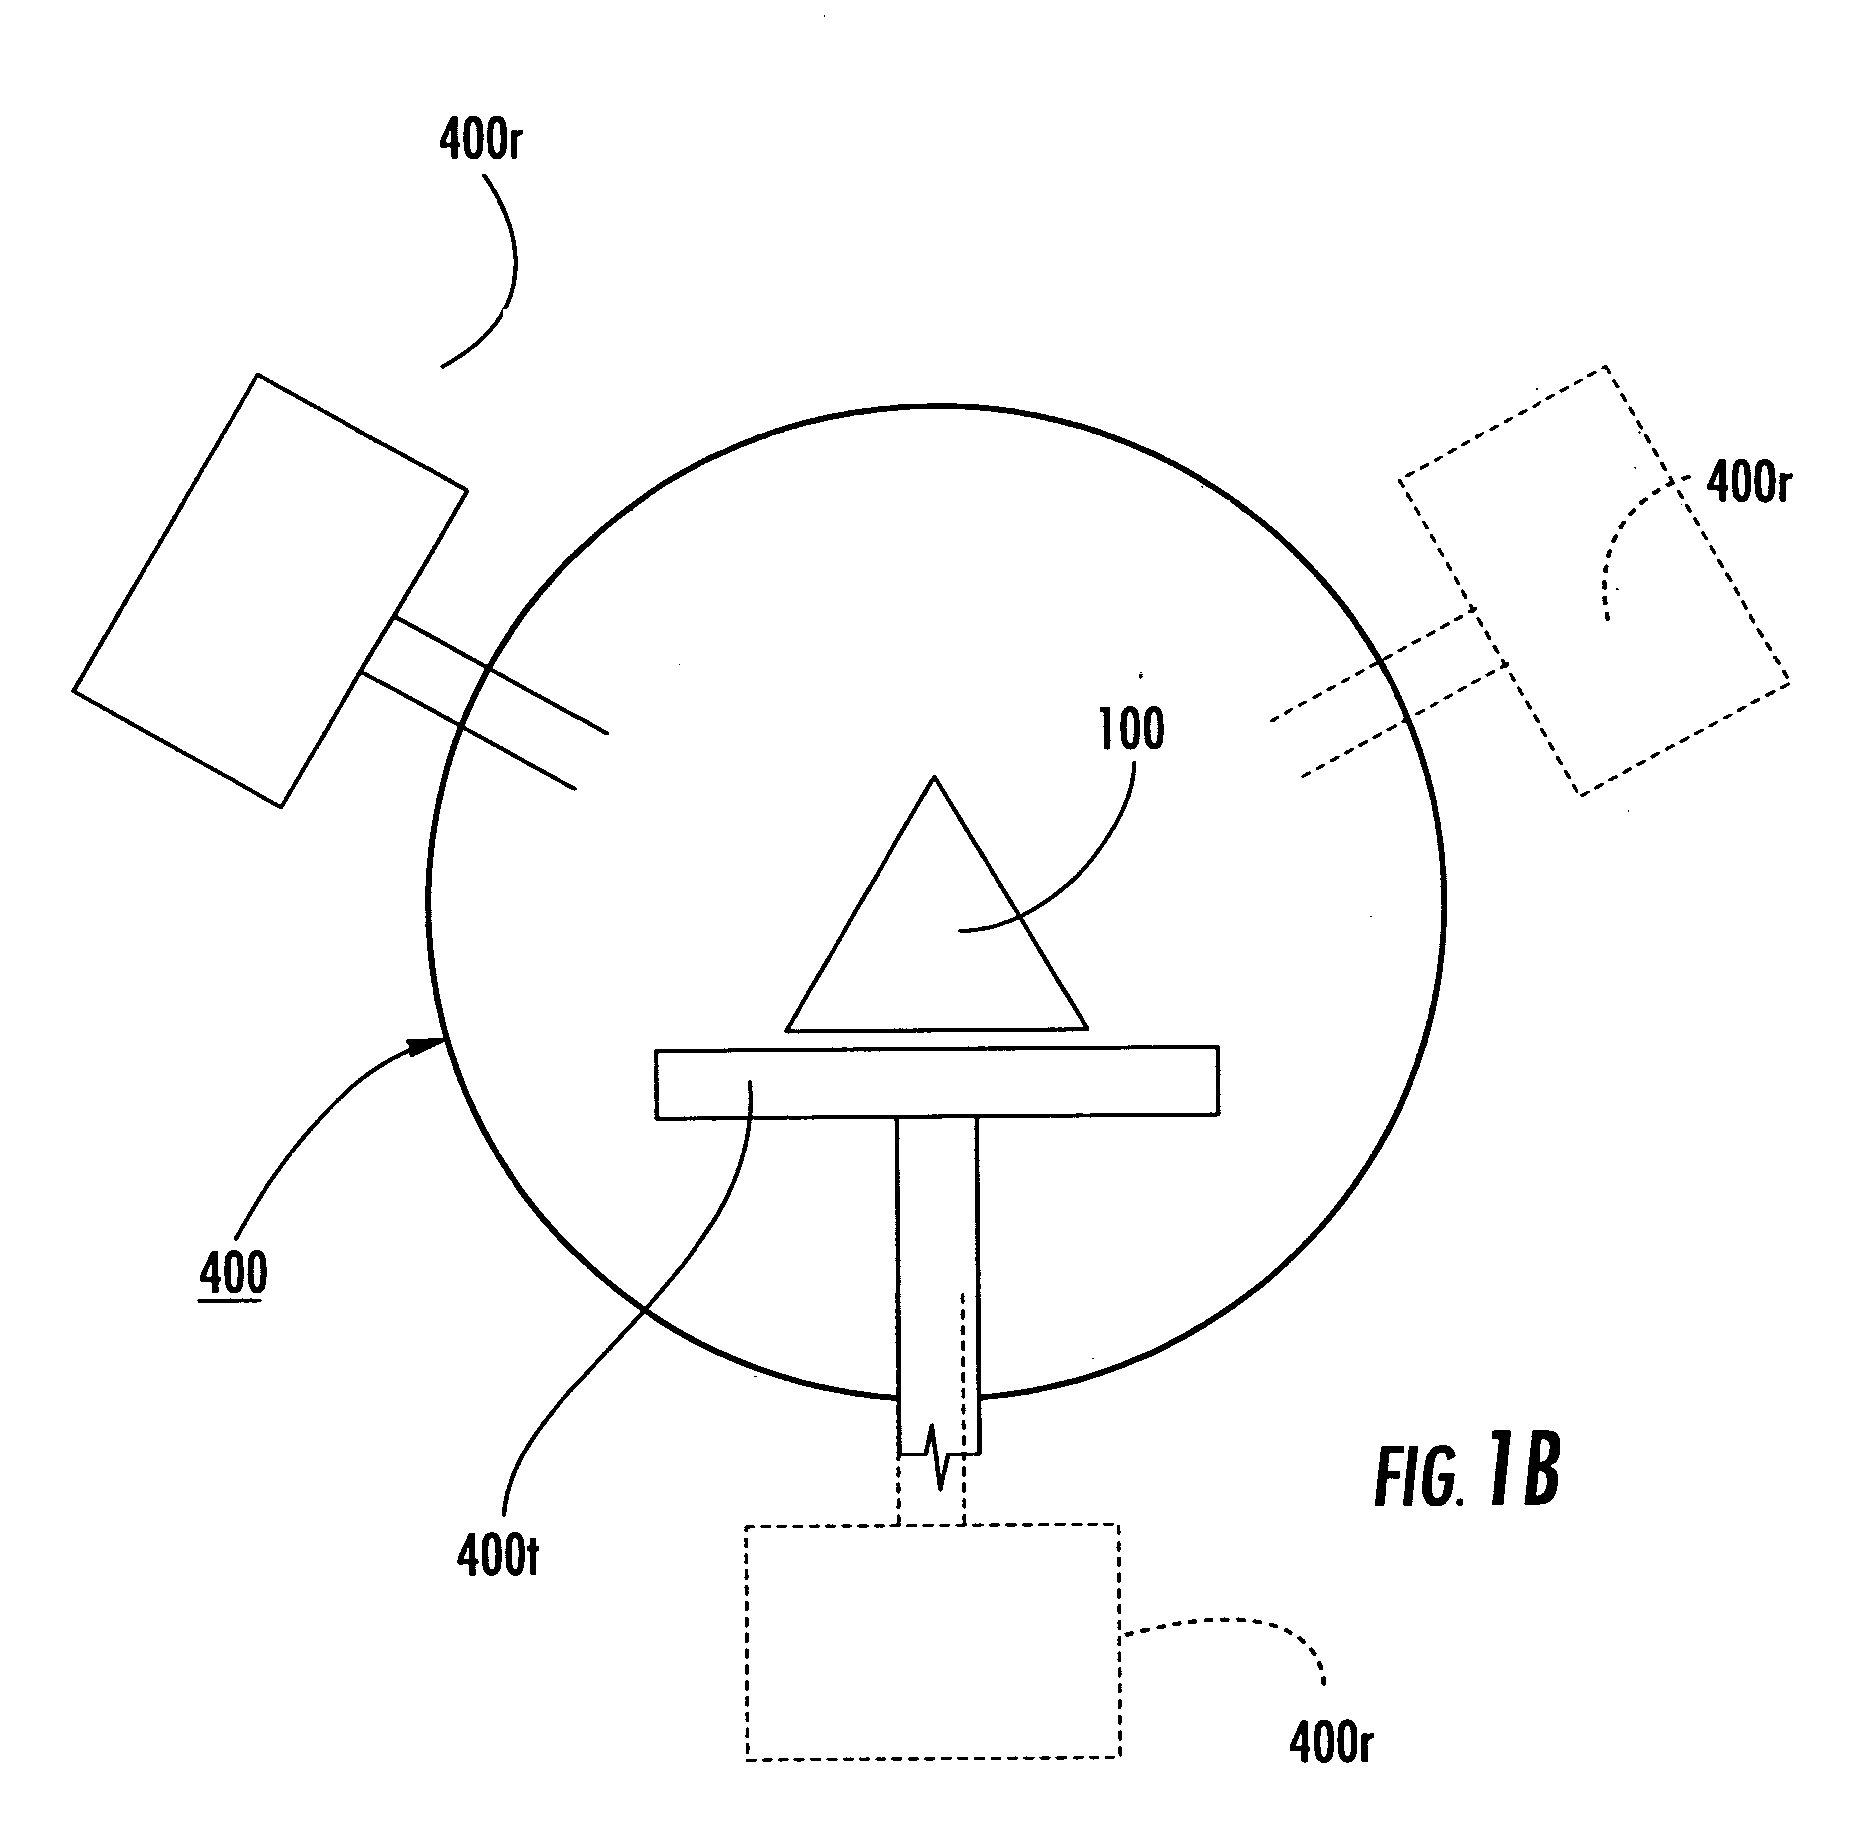 Radiation isocenter measurement devices and methods and 3-D radiation isocenter visualization systems and related methods